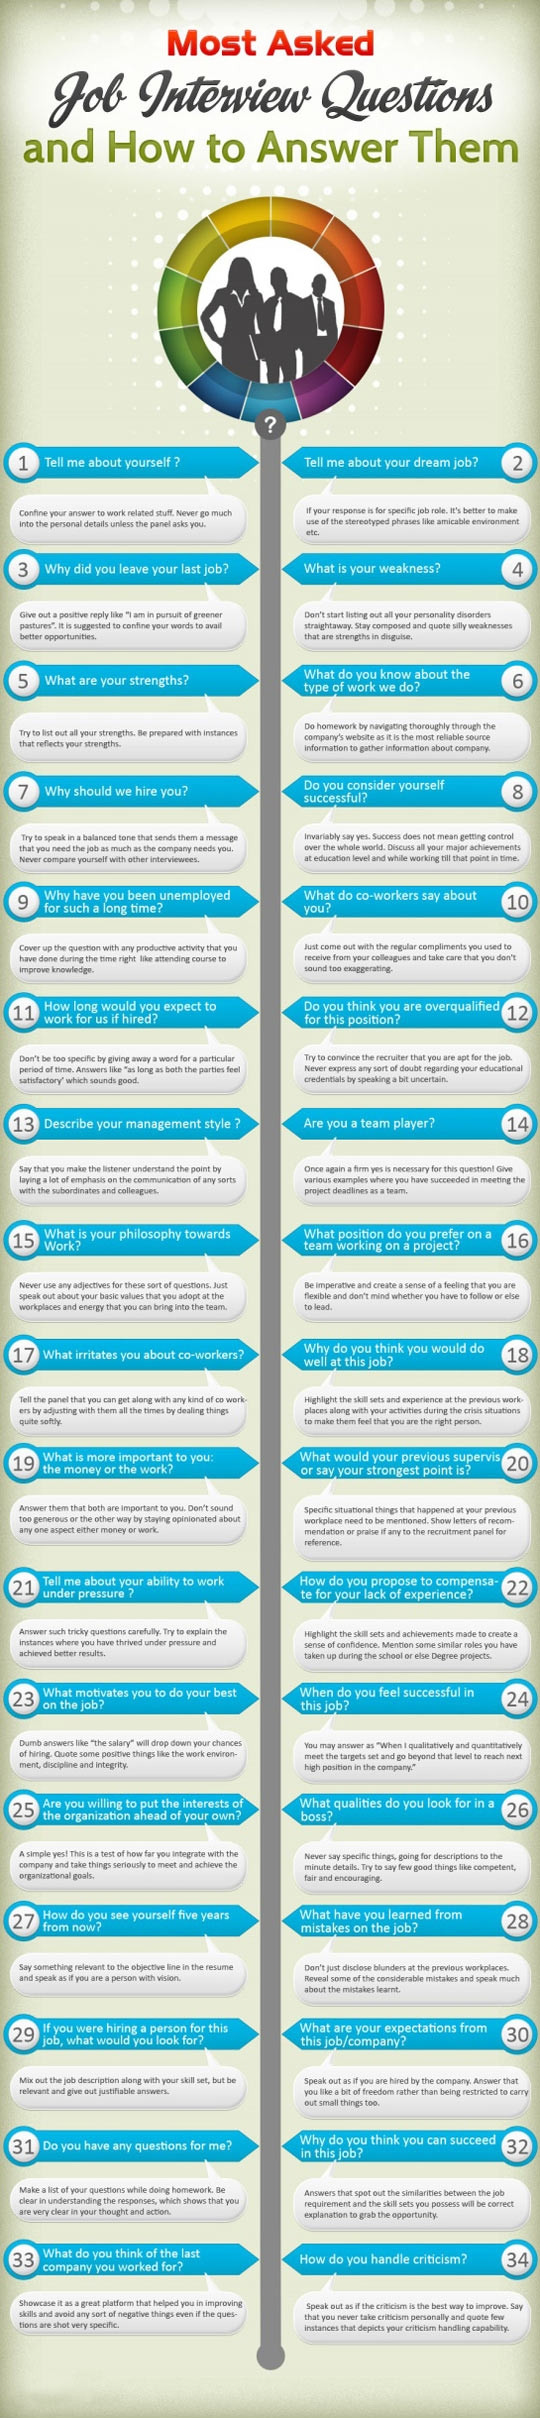 most asked job internview questions infographic